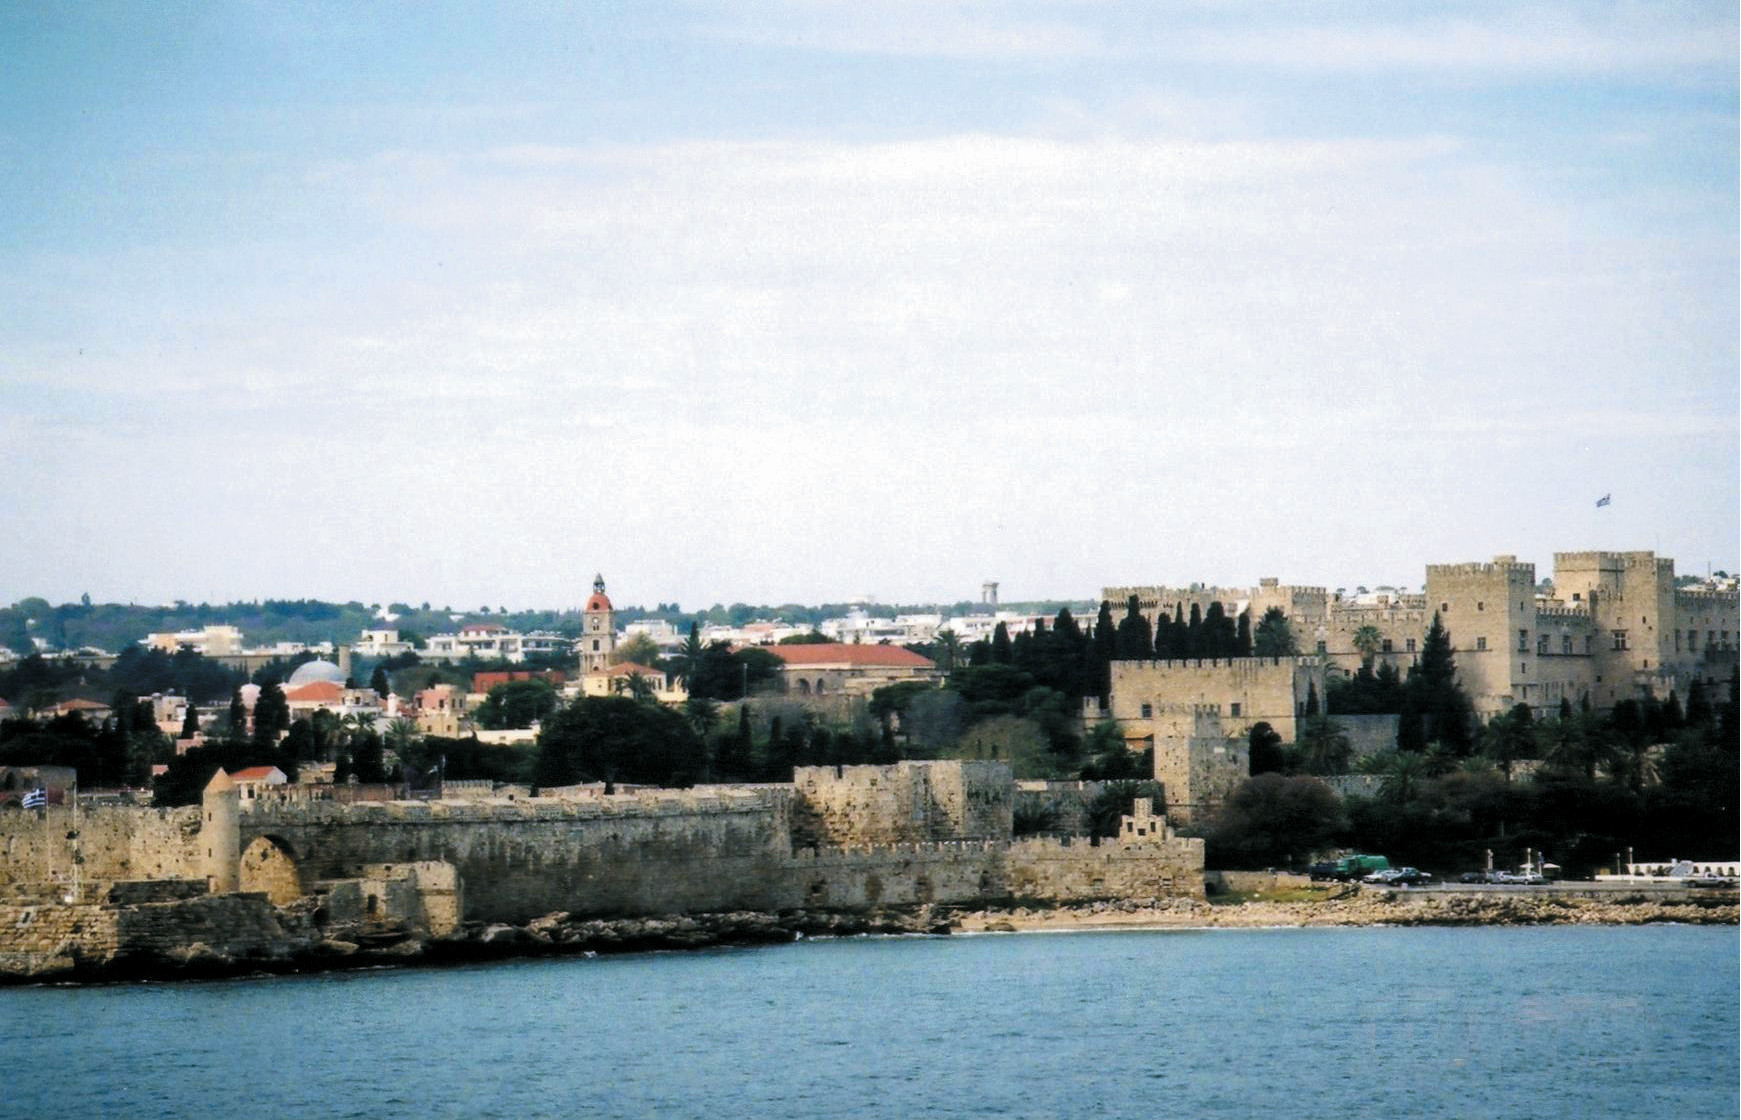 The formidible defenses of the Palace of the Grand Master at Rhodes Harbor are clearly visible in this modern-day photograph.